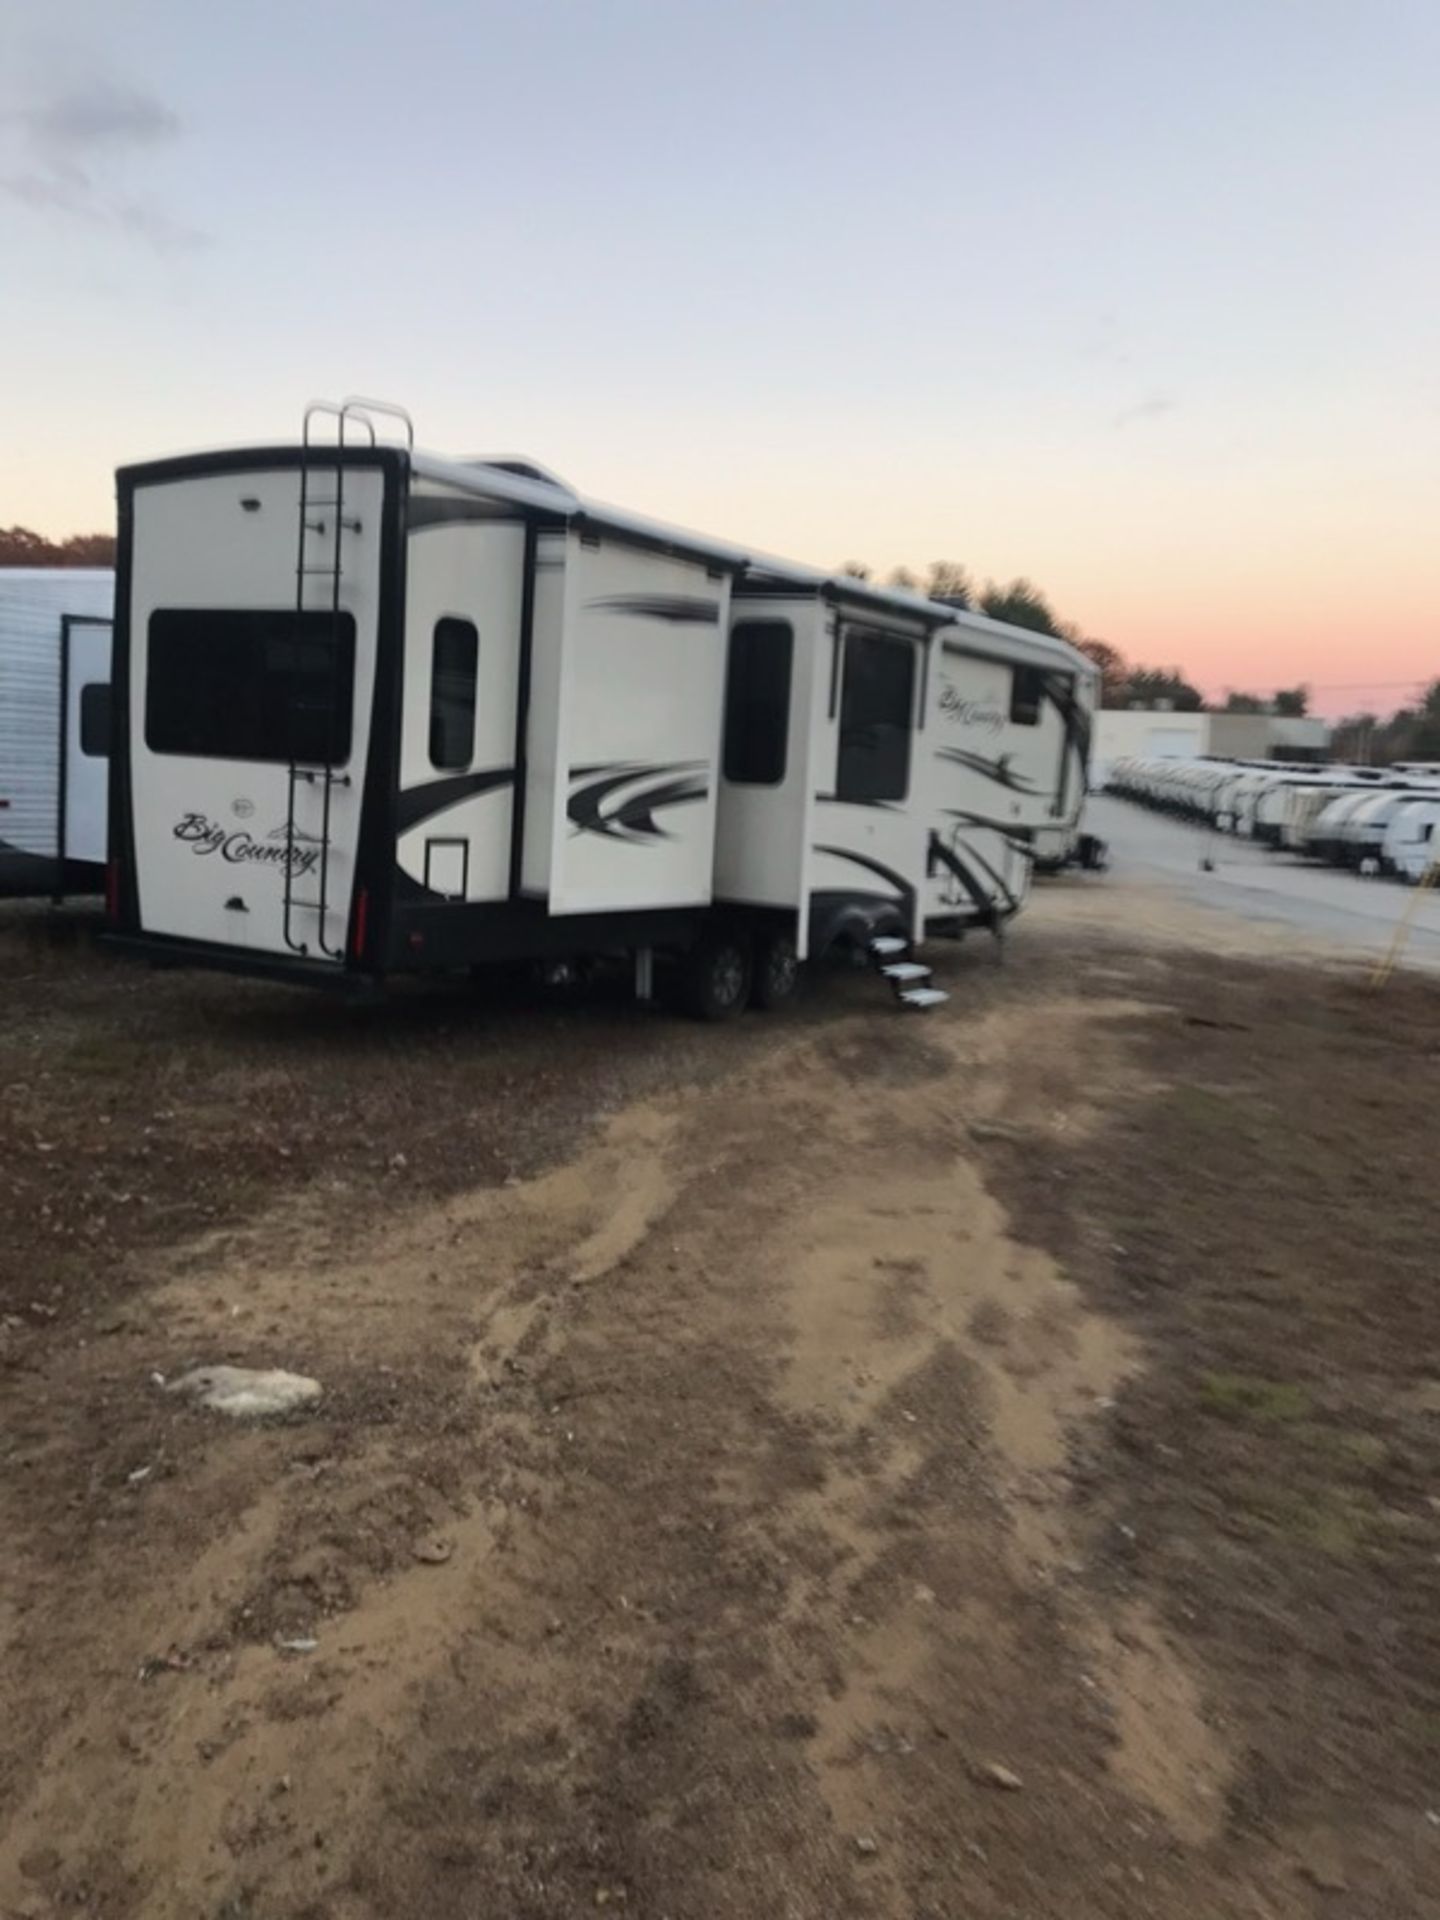 2018 Big Country 5th Wheel Camper Model 3965DSS w/4 Slide Outs - SEE VIDEO & DESCRIPTION - Image 8 of 38